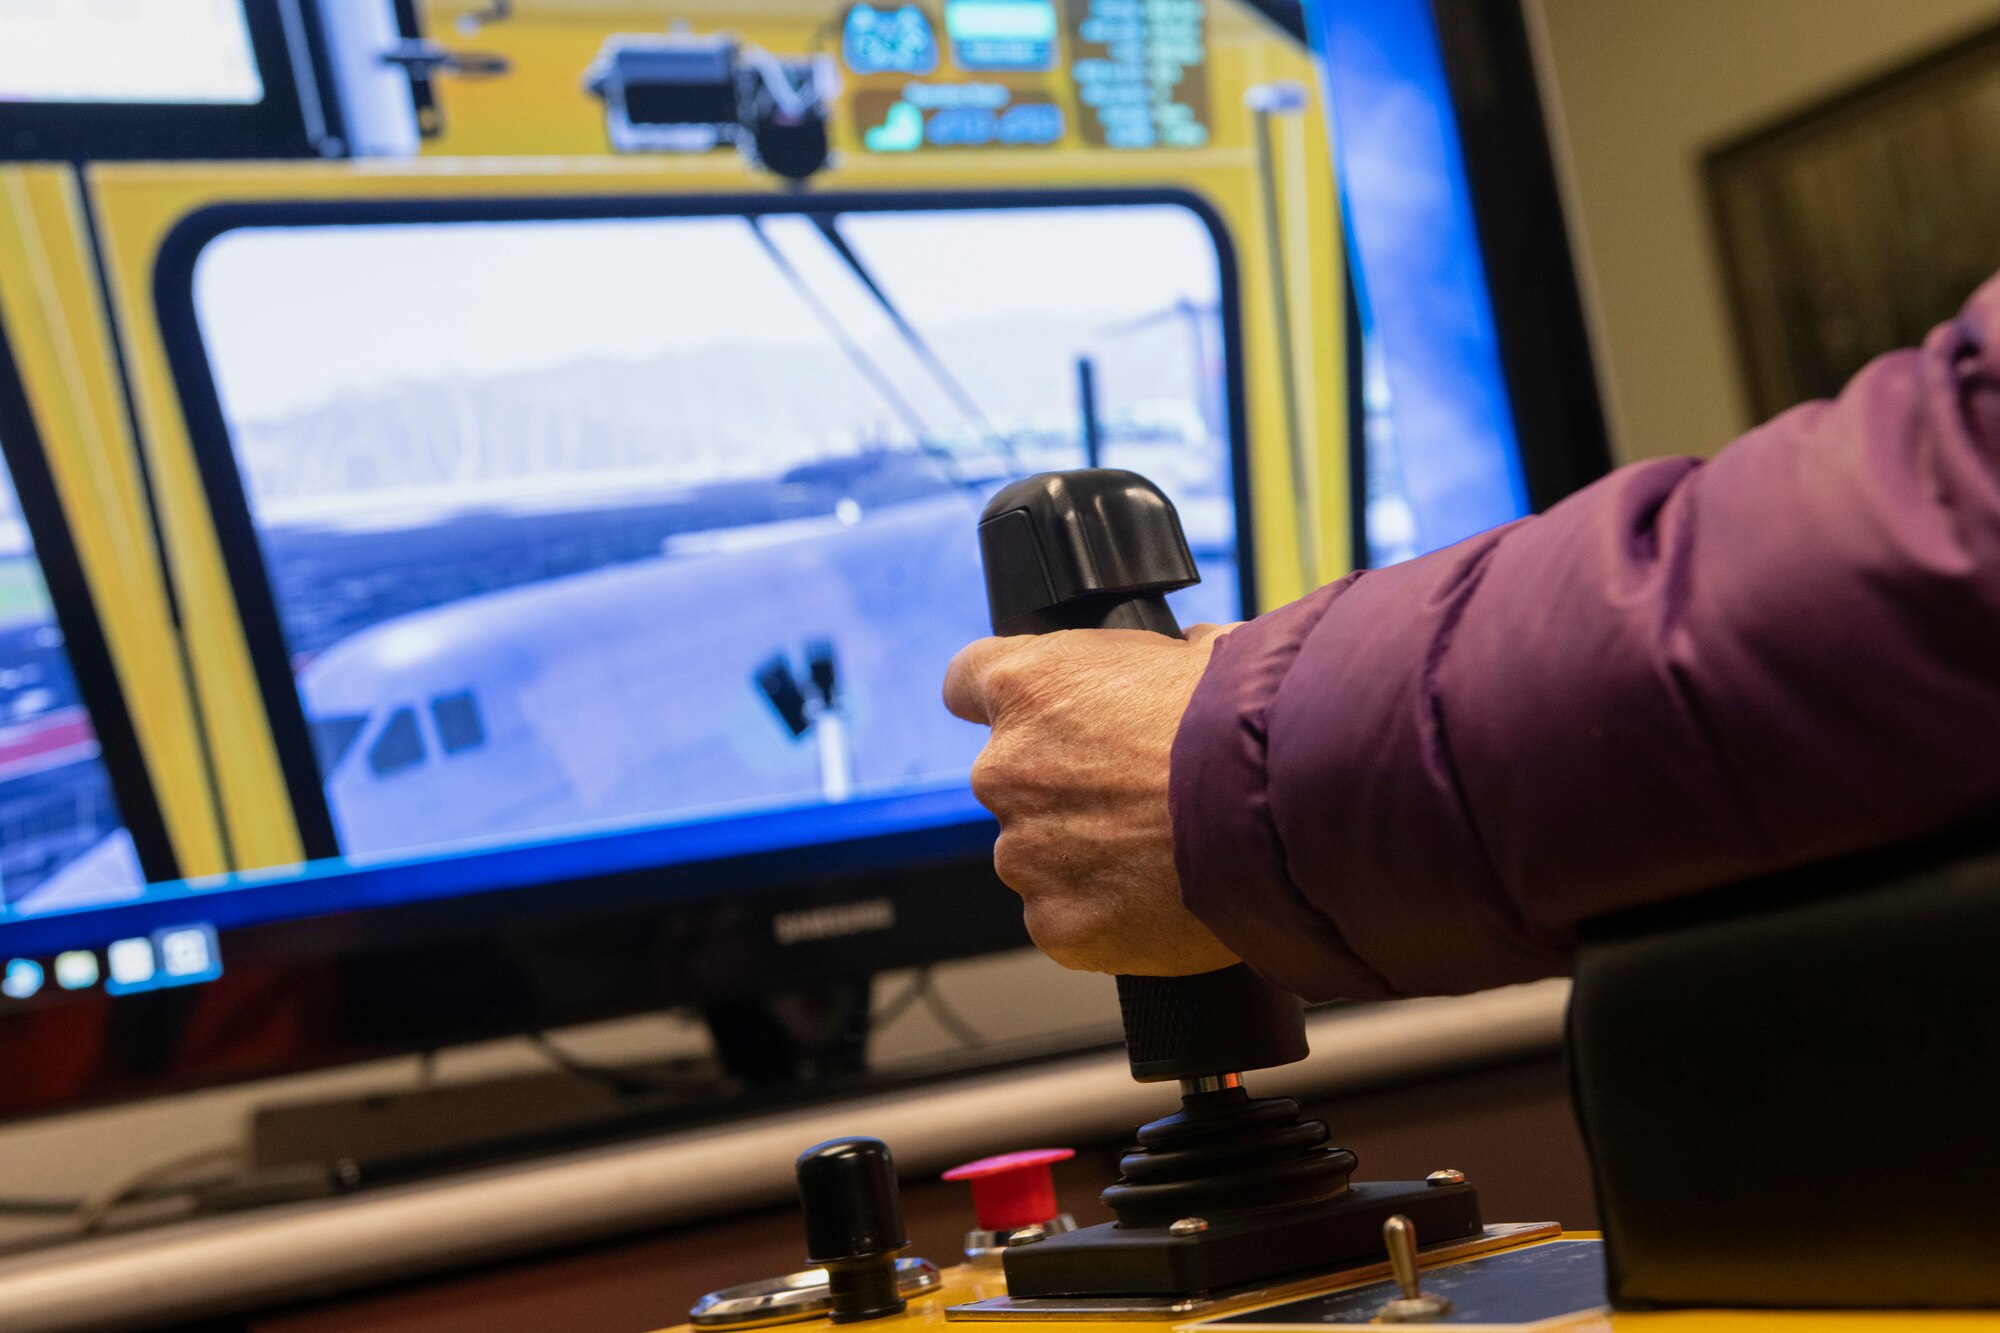 The deicing simulator allows the Airmen to train year-round while saving the Air Force millions of dollars in deicing fluid, equipment maintenance and reduces the risk of potential aircraft damages.